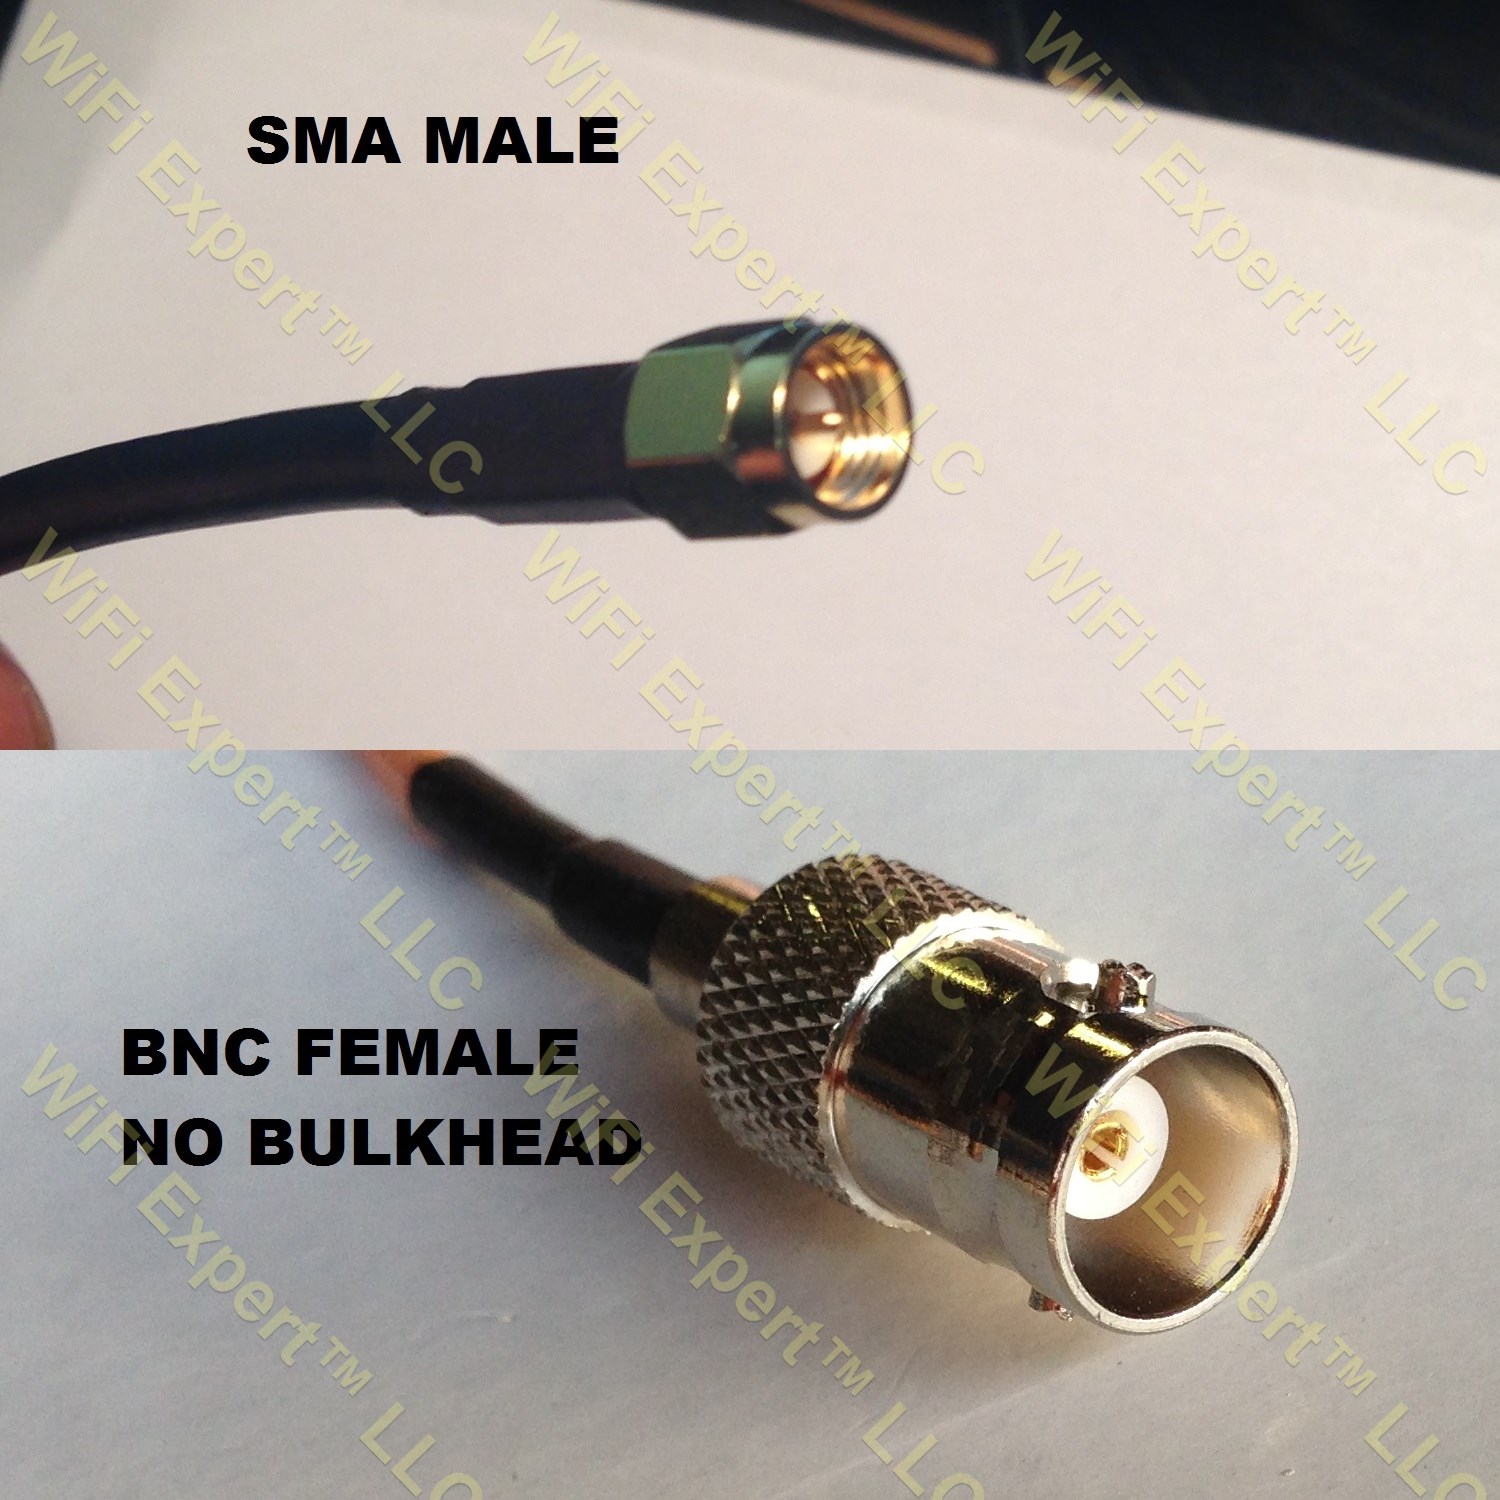 1 x RG58 SMA MALE or FEMALE to BNC MALE or Female Bulkhead RF Pigtail Cables USA 